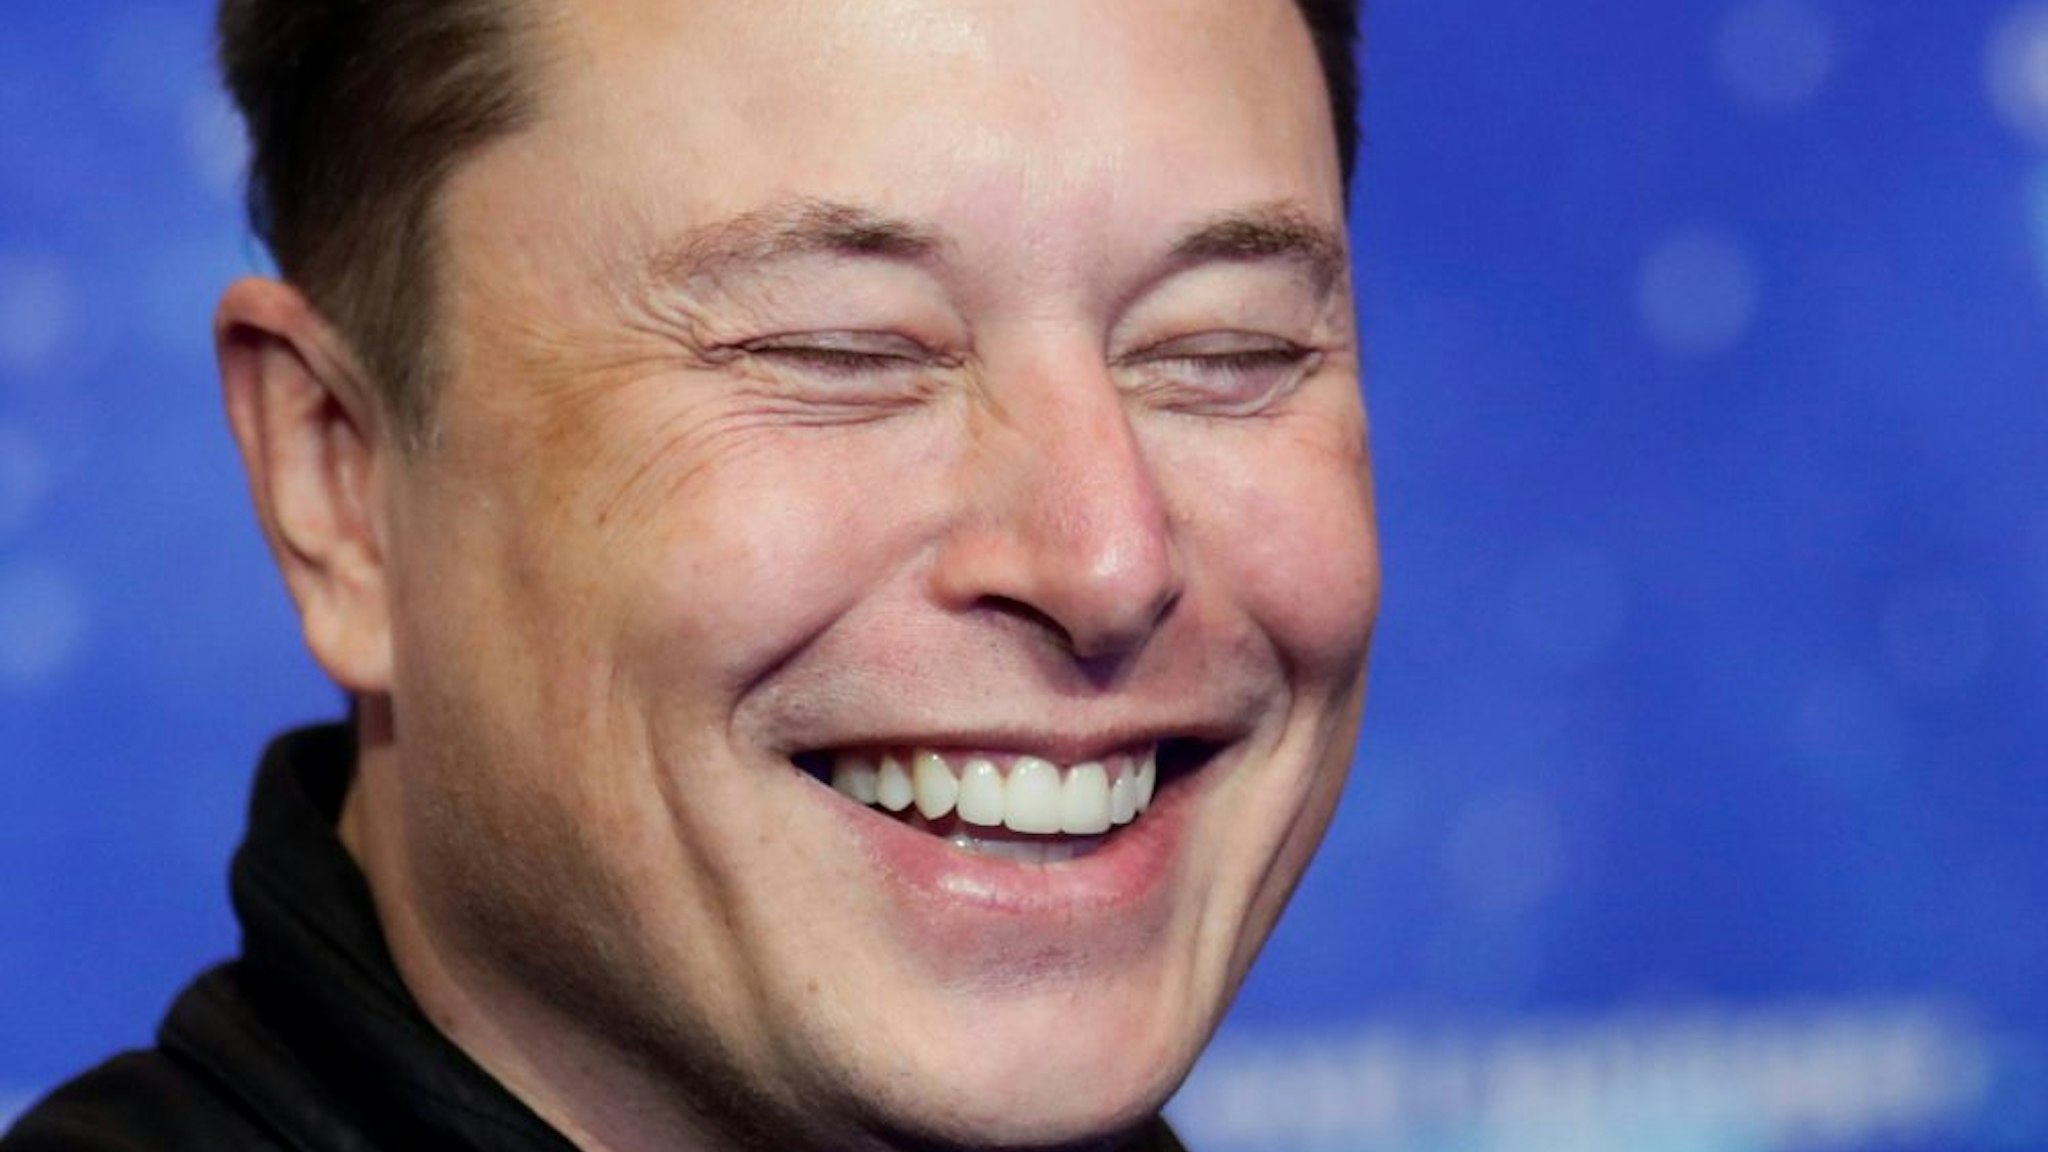 BERLIN, GERMANY DECEMBER 01: SpaceX owner and Tesla CEO Elon Musk poses on the red carpet of the Axel Springer Award 2020 on December 01, 2020 in Berlin, Germany.